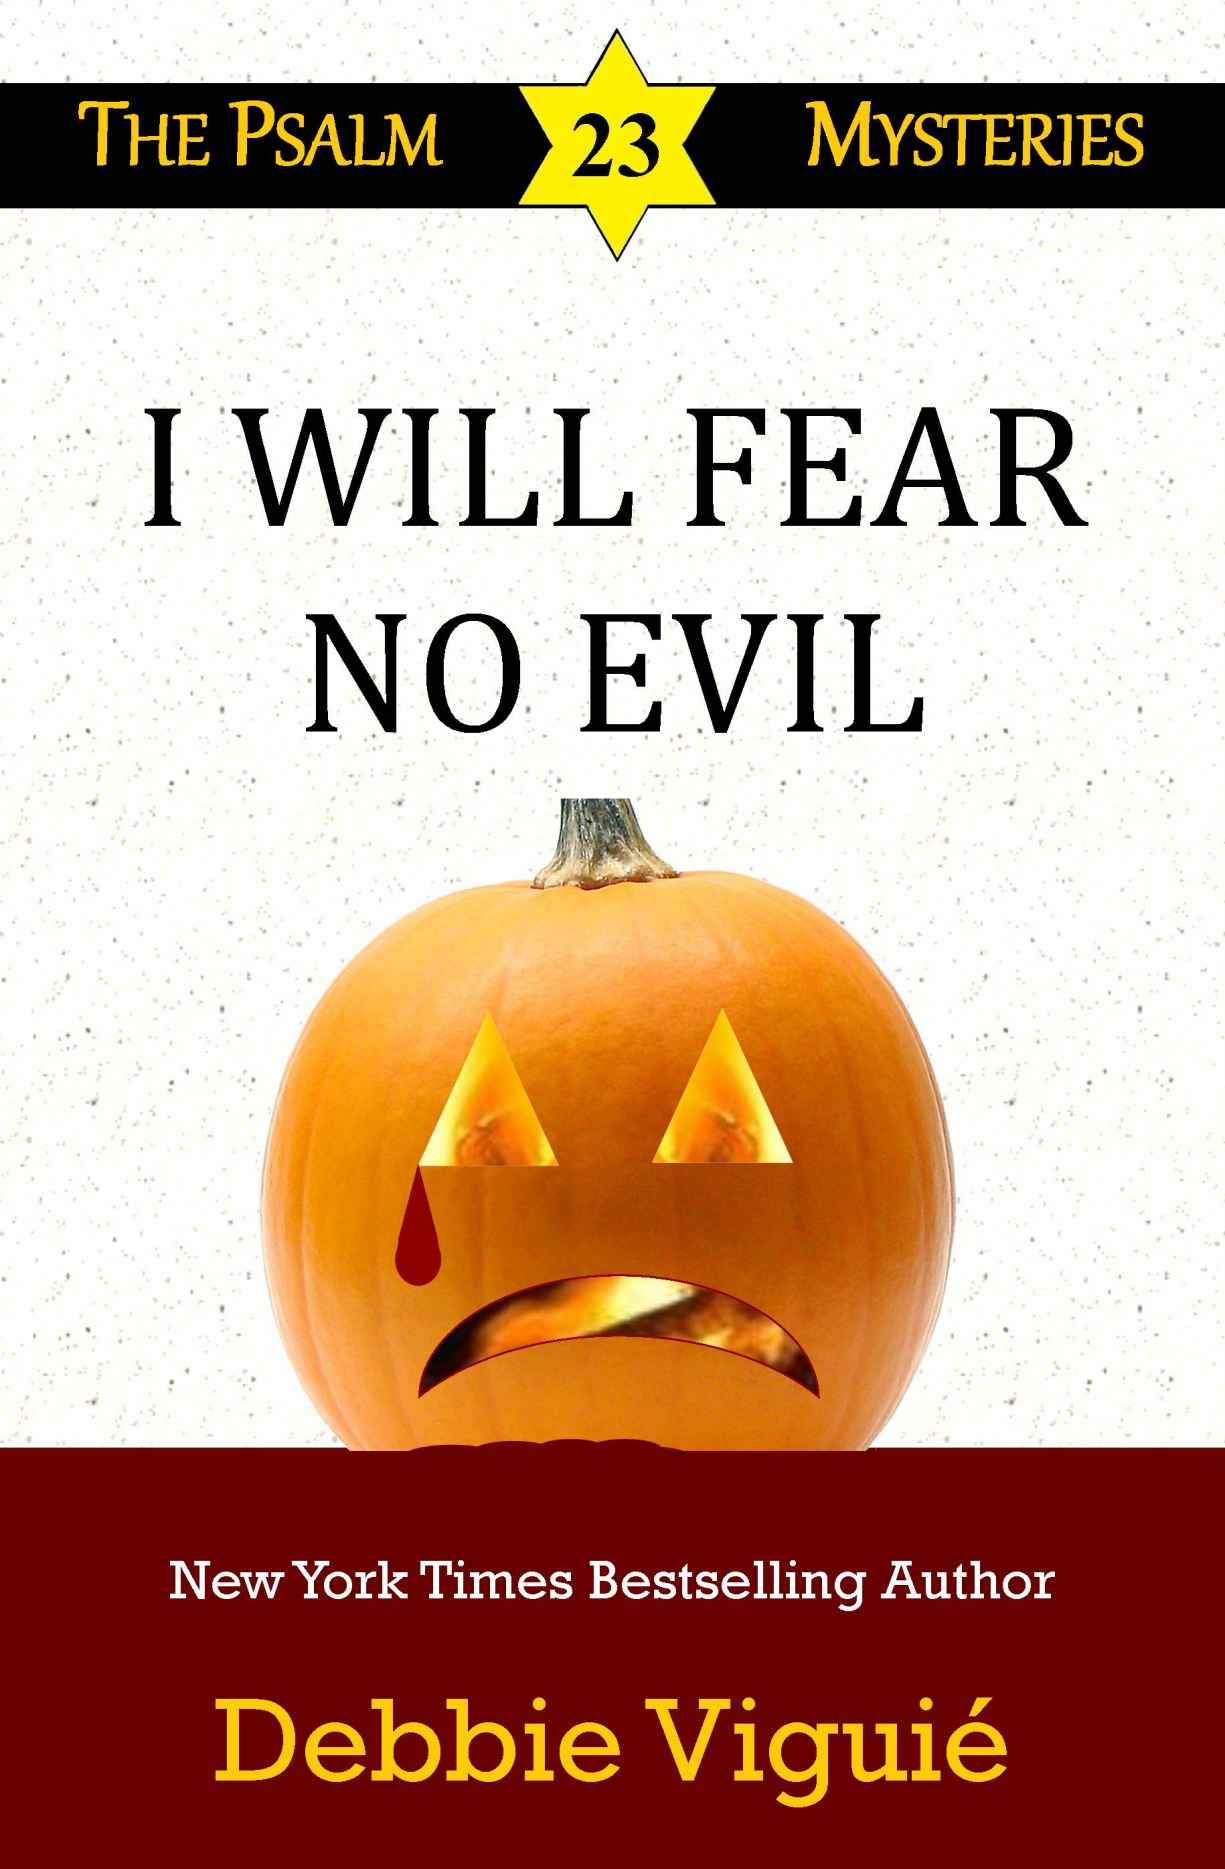 I Will Fear No Evil (Psalm 23 Mysteries Book 10) by Debbie Viguié